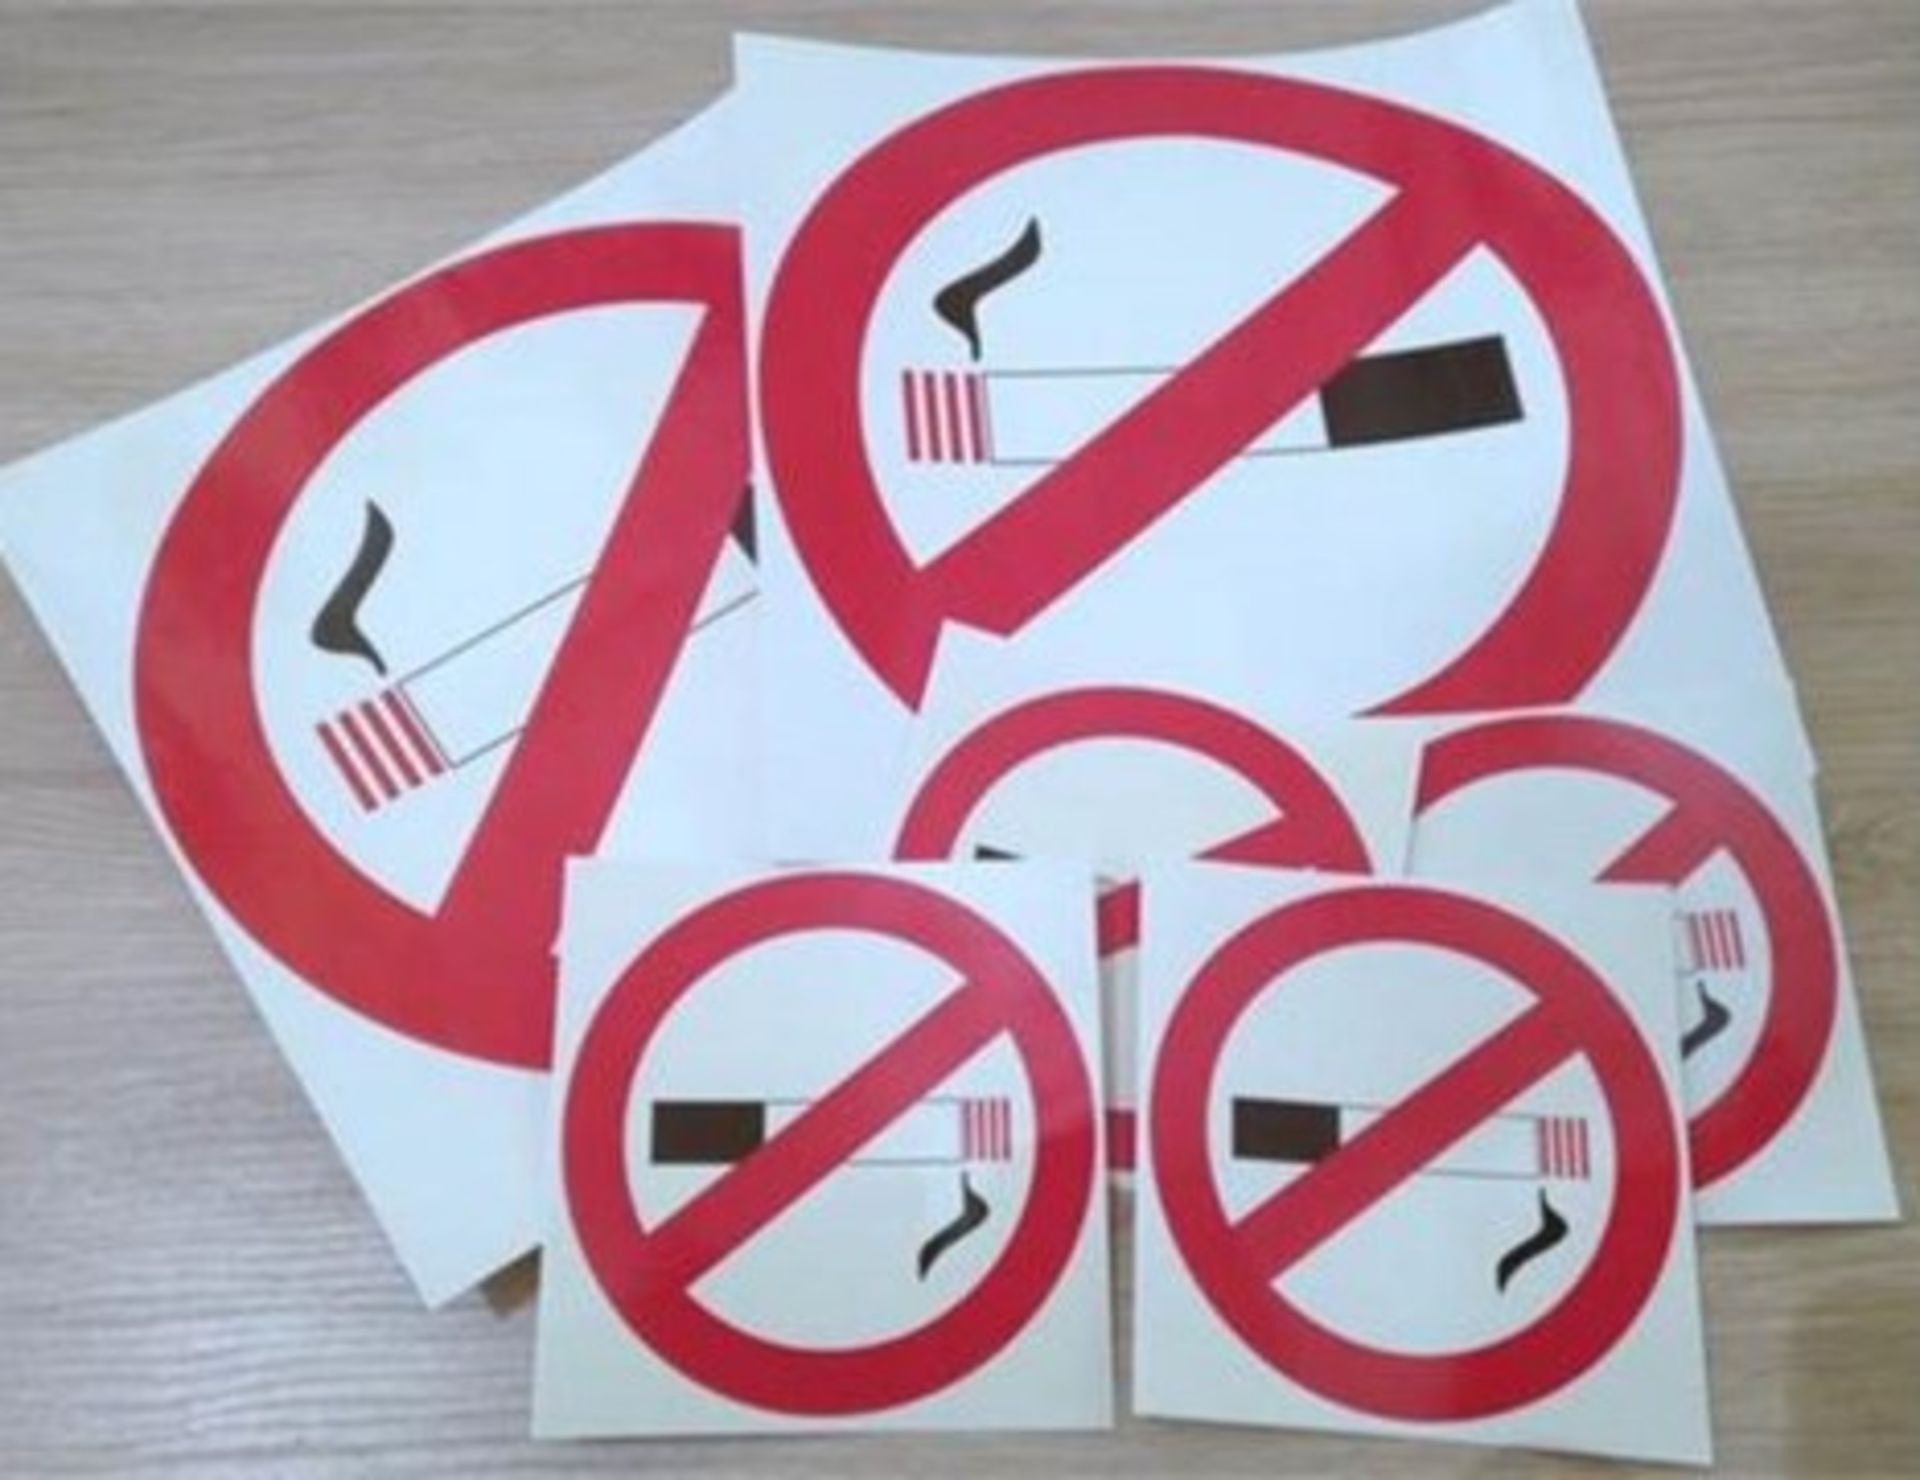 240 x No Smoking Sticker Signs - Includes 40 x Packs of 6 x Stickers - Small and Large Sizes